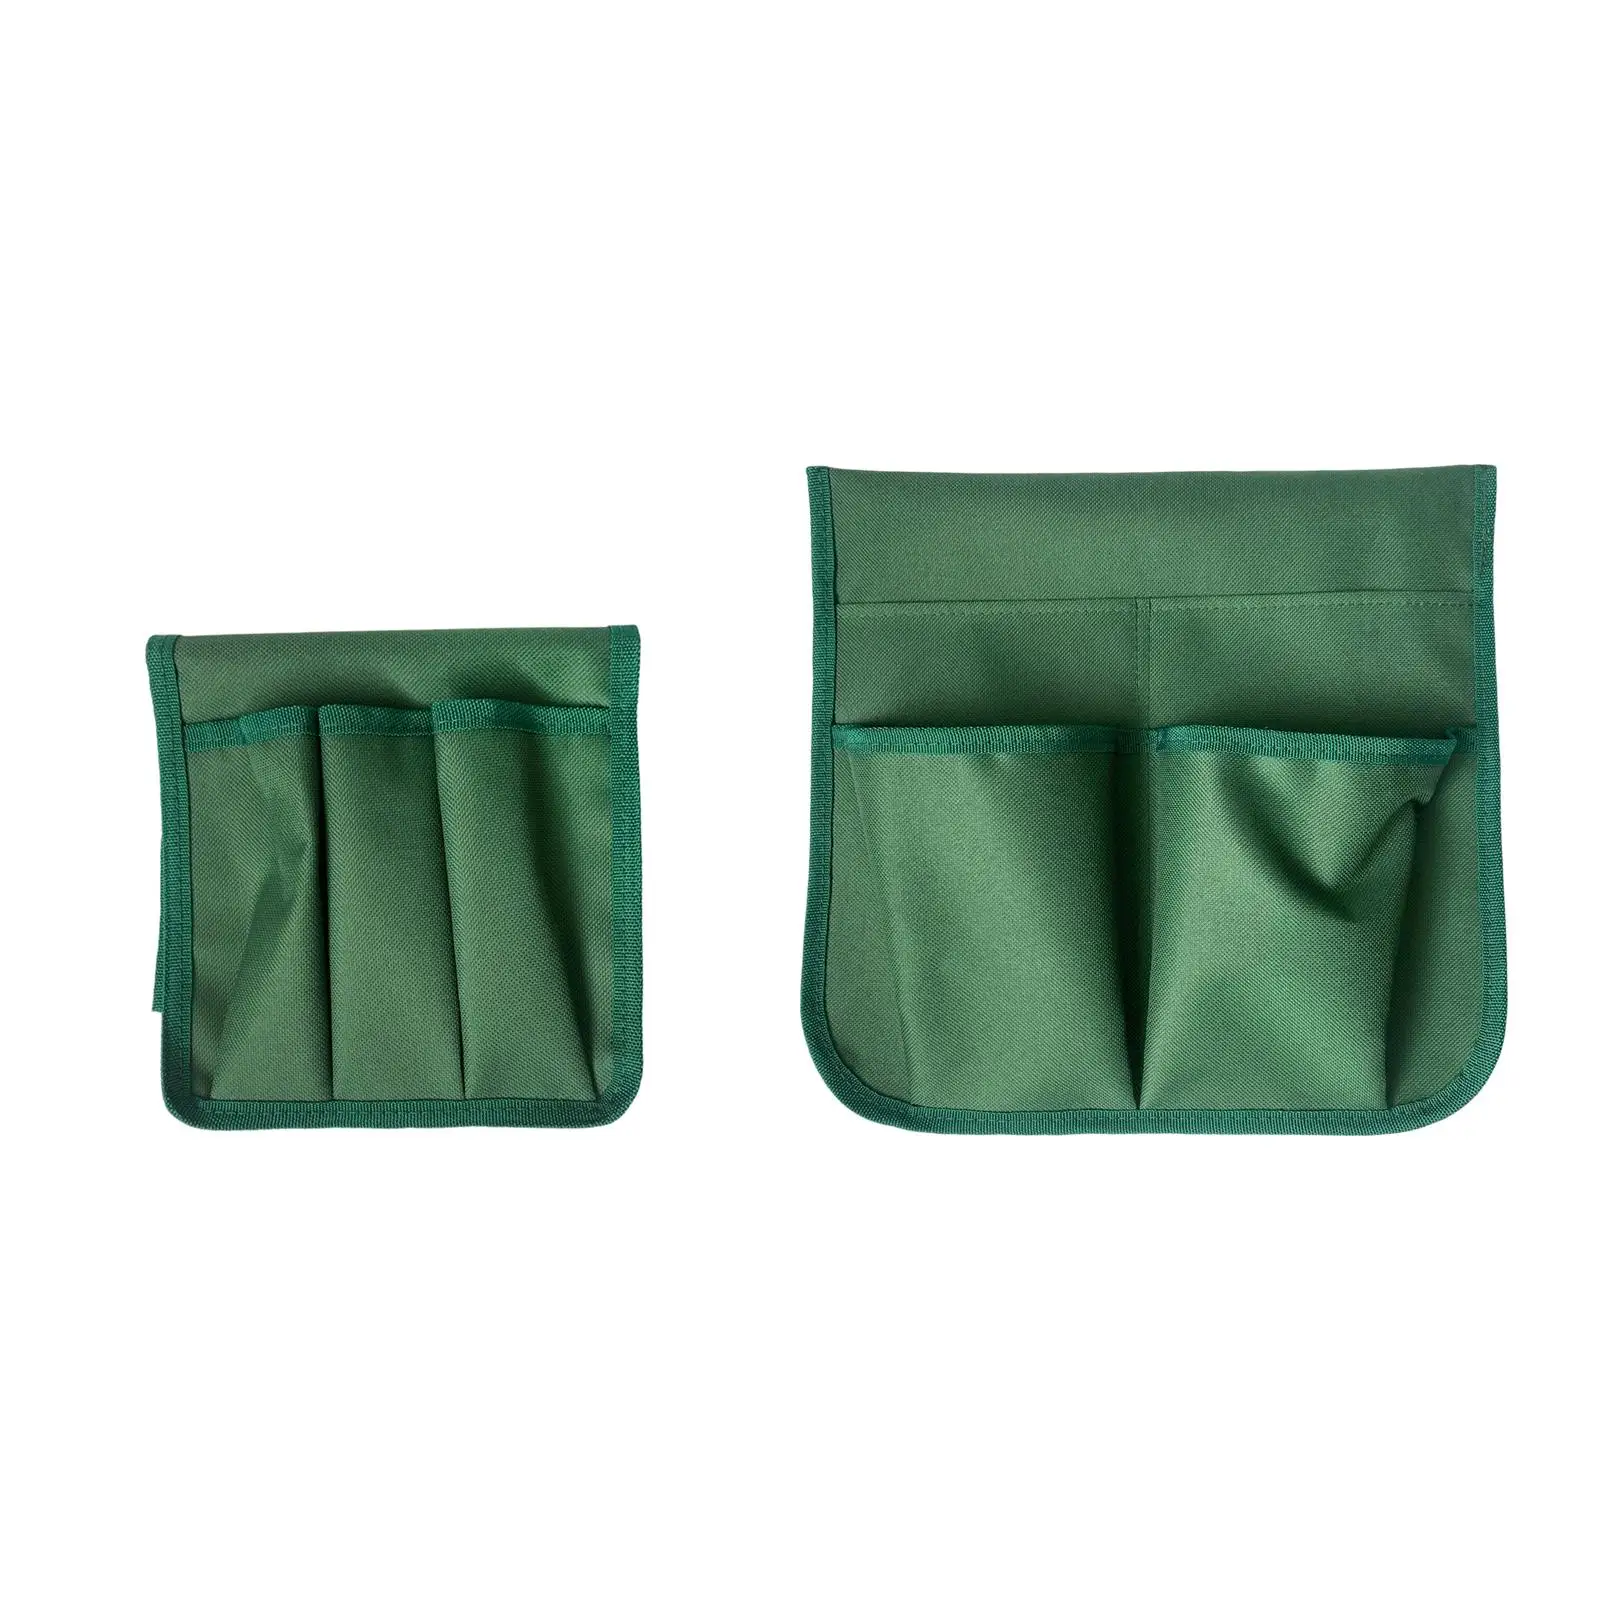 Gardening Hand Tool Pouch Utility Pockets Apron Bench Kneeling Bag Multi Pockets Lightweight Foldable Tool Storage Bag Pouch